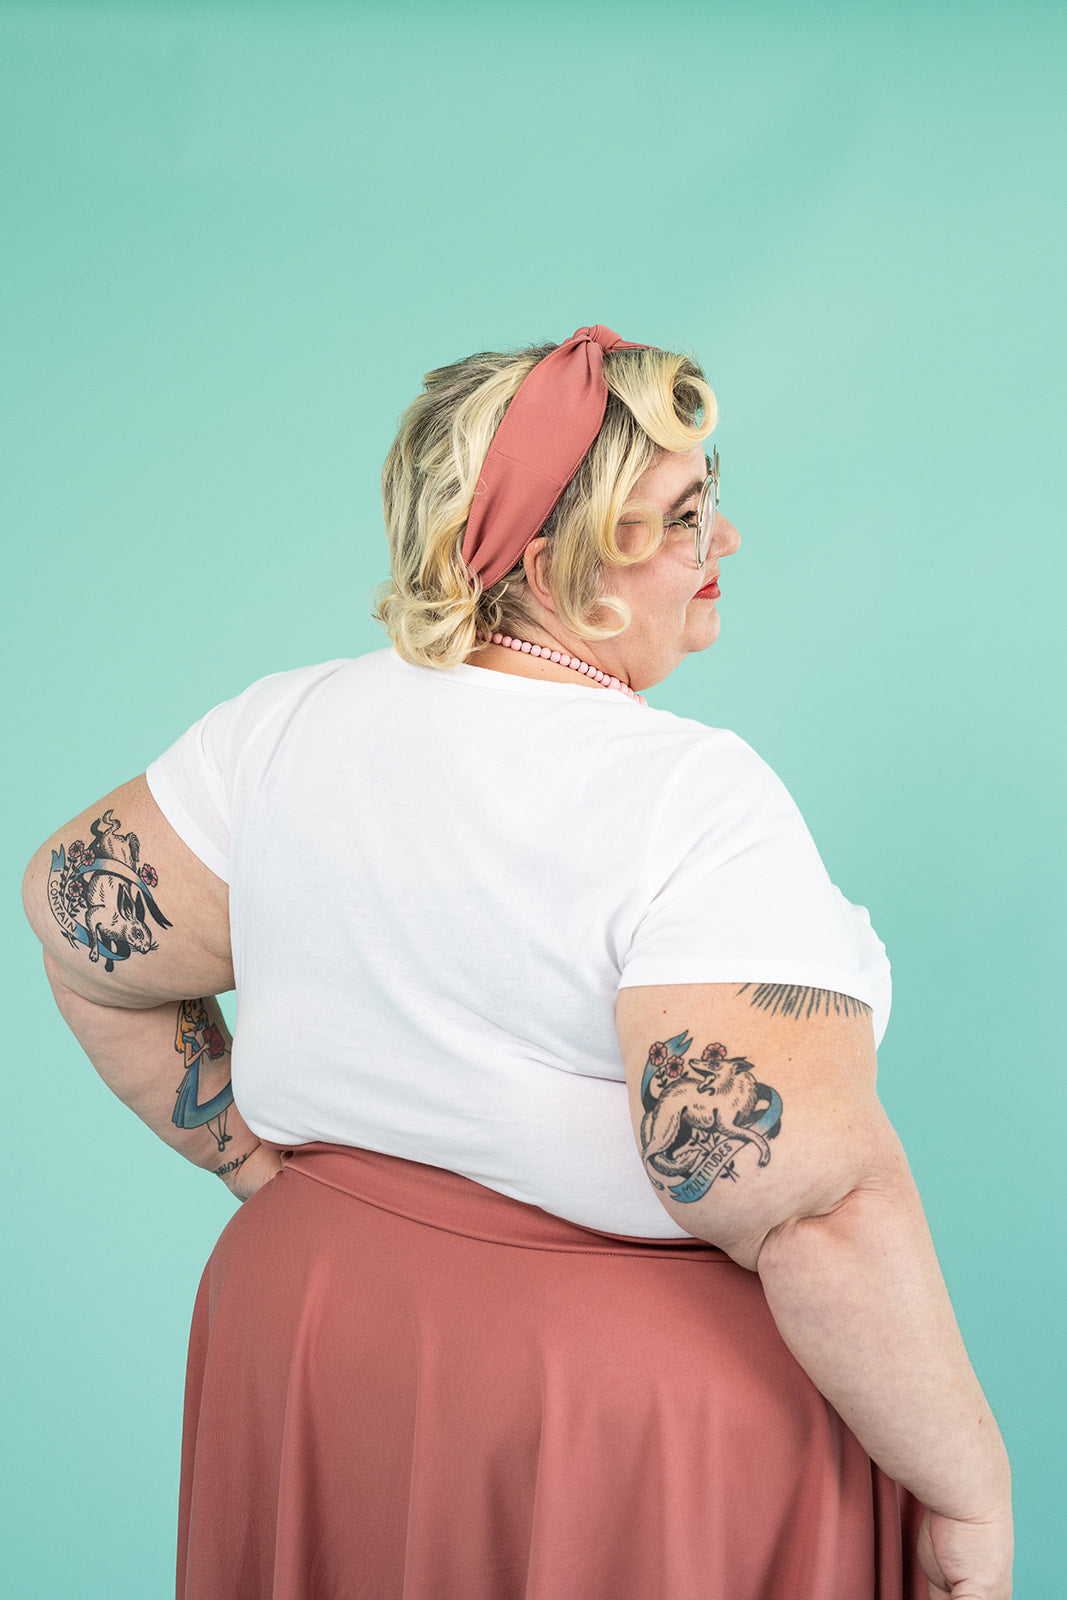 A plus-size blonde woman is facing away from the camera. She has several tattoos on her arms; she is wearing a white tshirt and a pink skirt